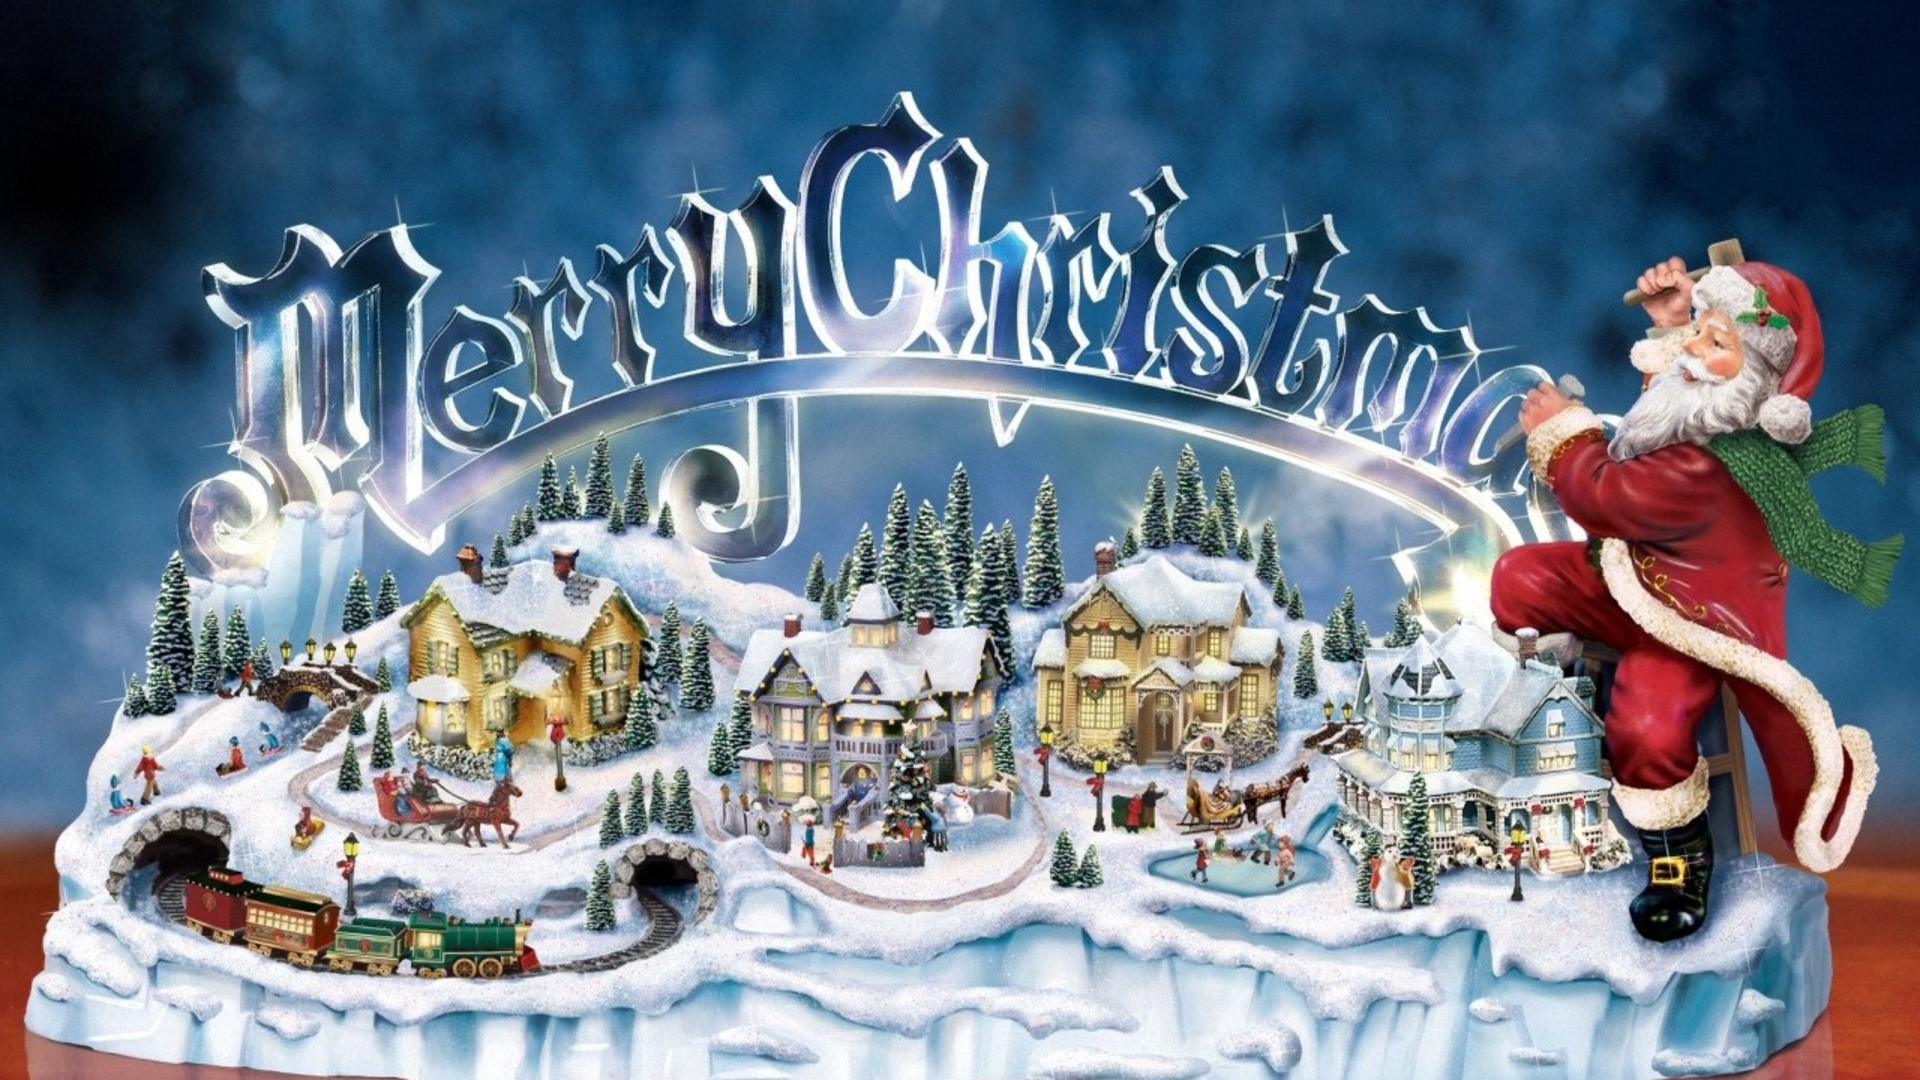 Merry Christmas 2014 Hd Wallpapers 3d Animated Images Pics Free